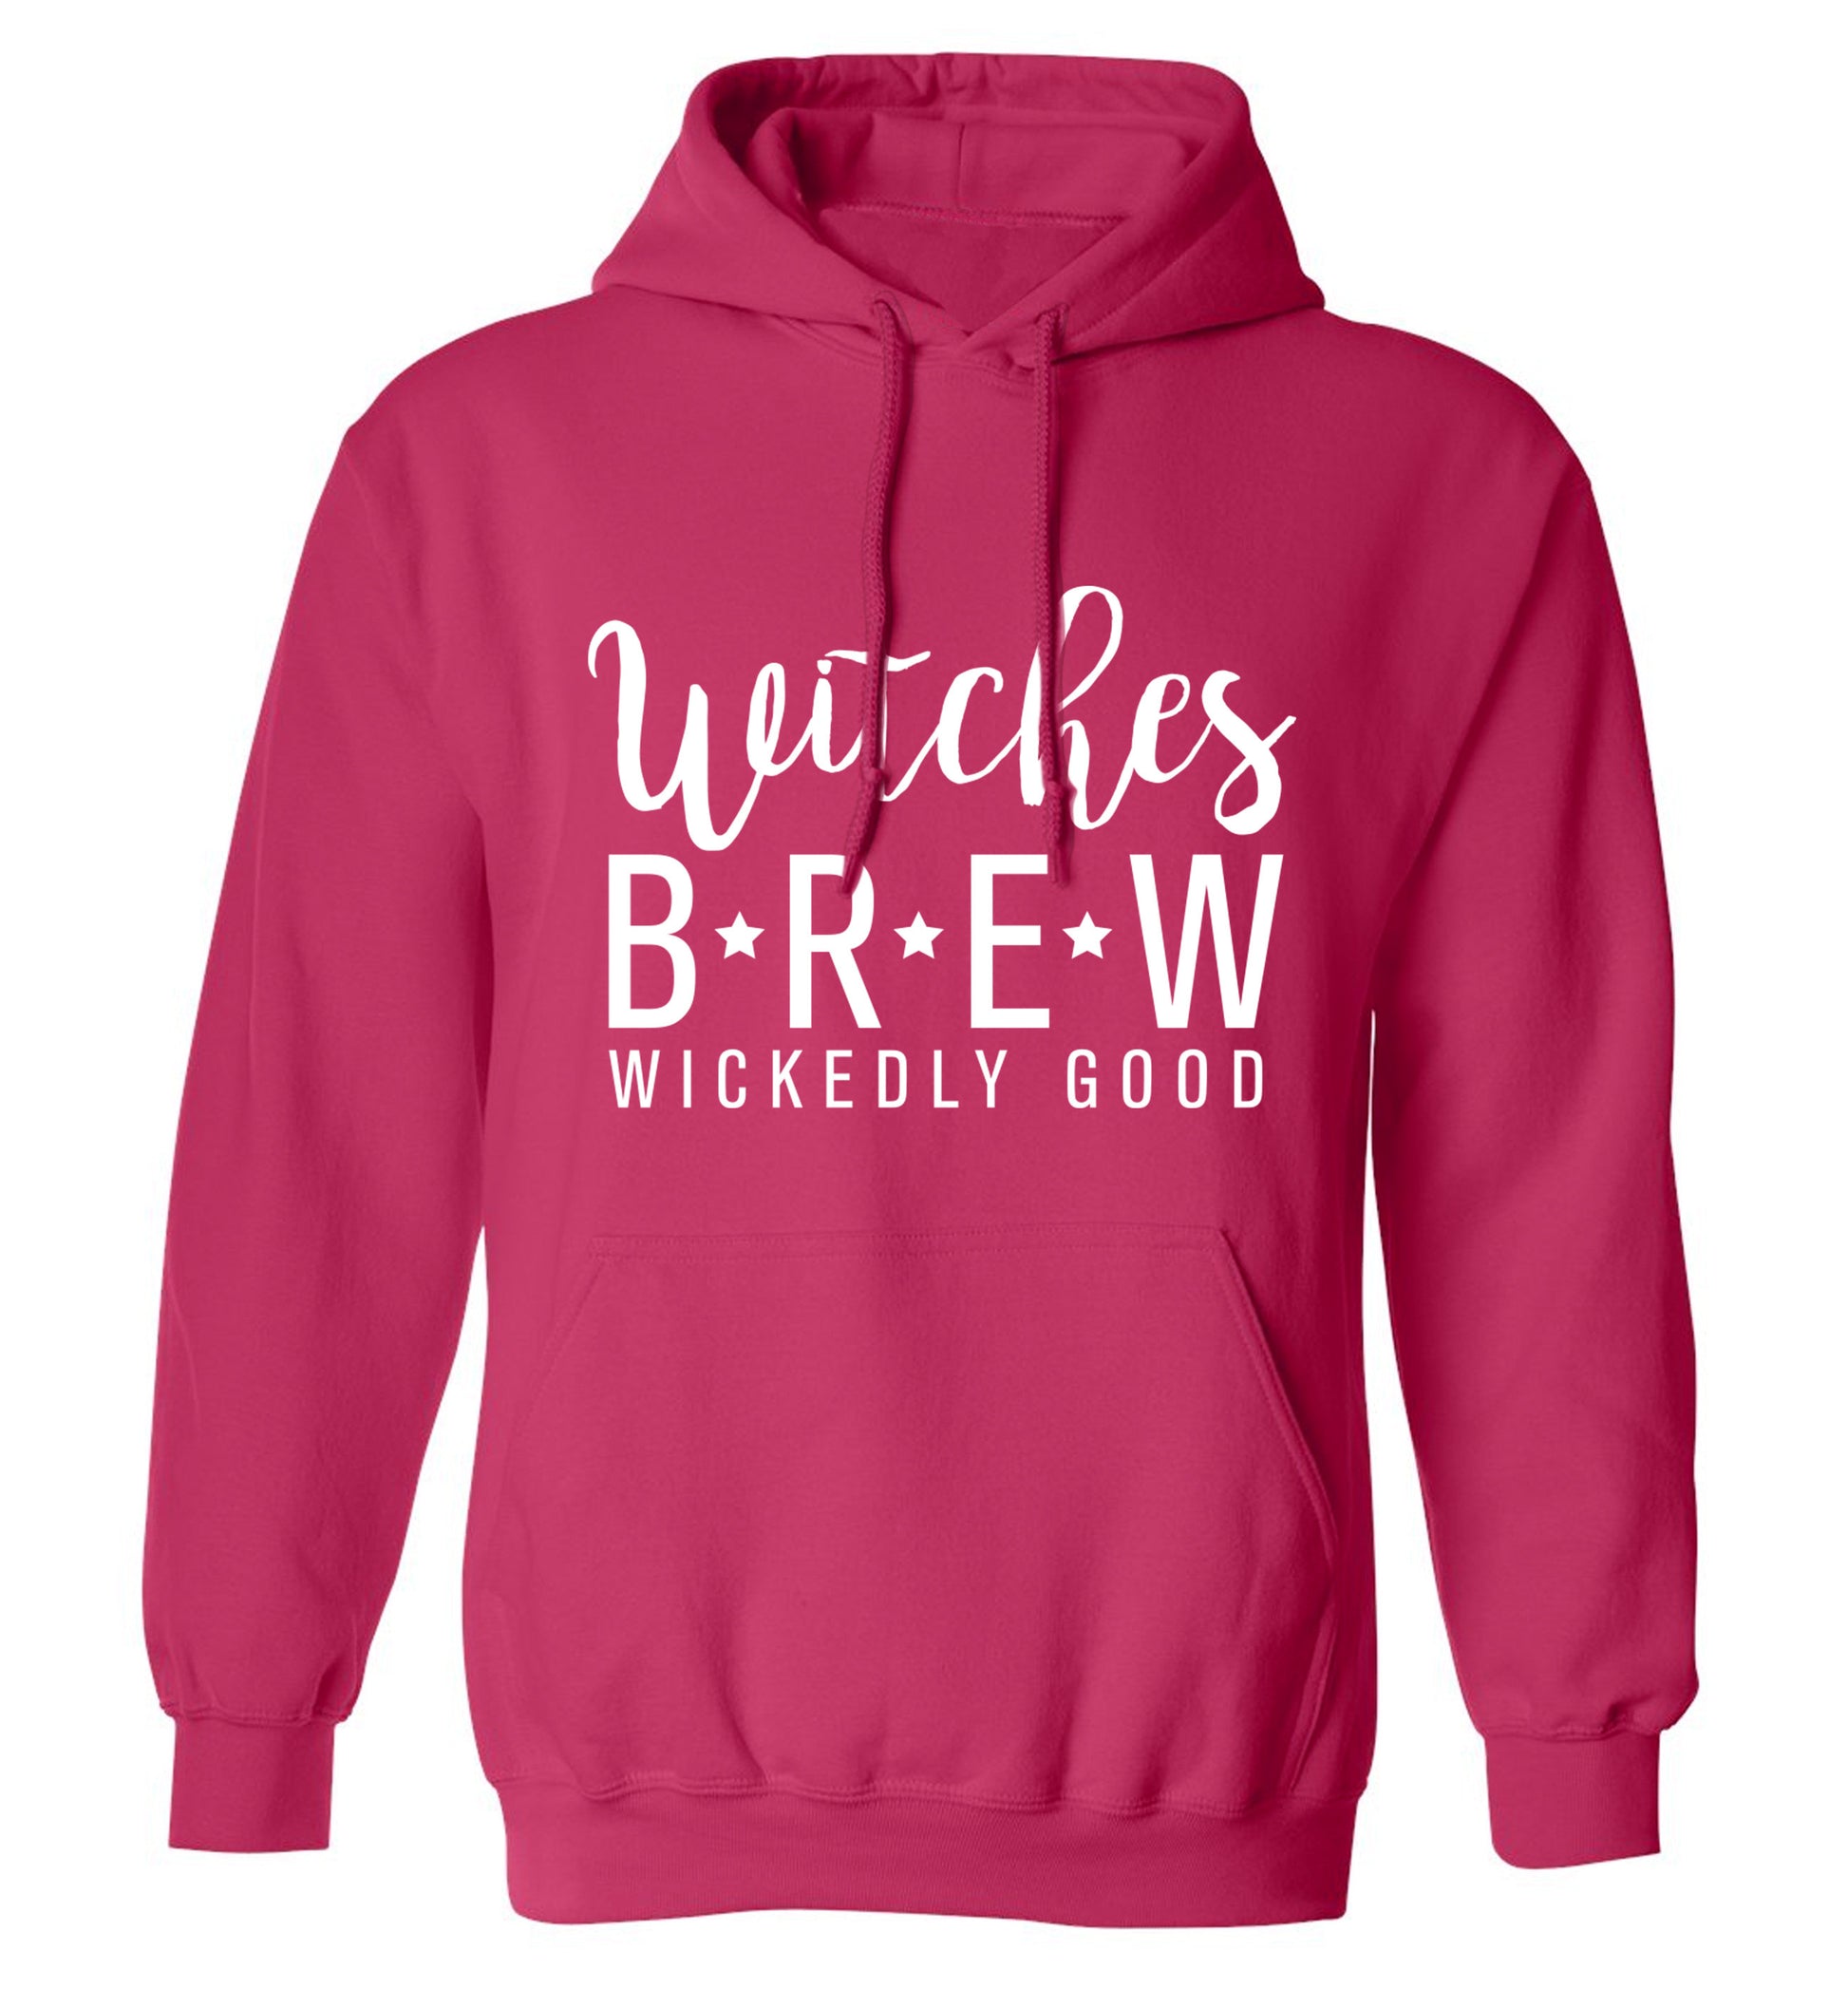 Witches Brew wickedly good adults unisex pink hoodie 2XL